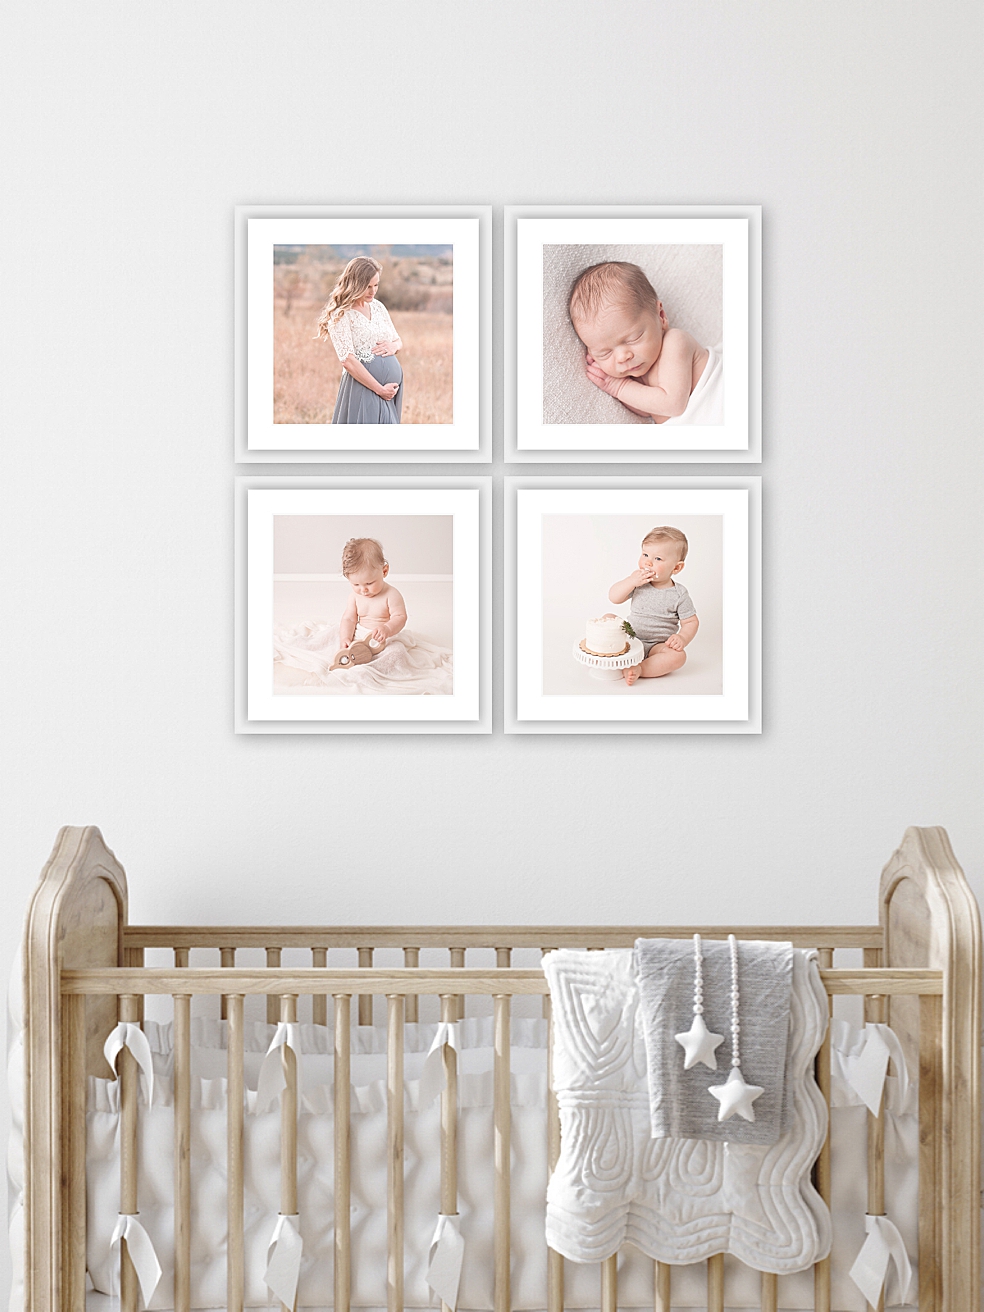 Gallery wall mock-up above a crib | Jessica Lee Photography